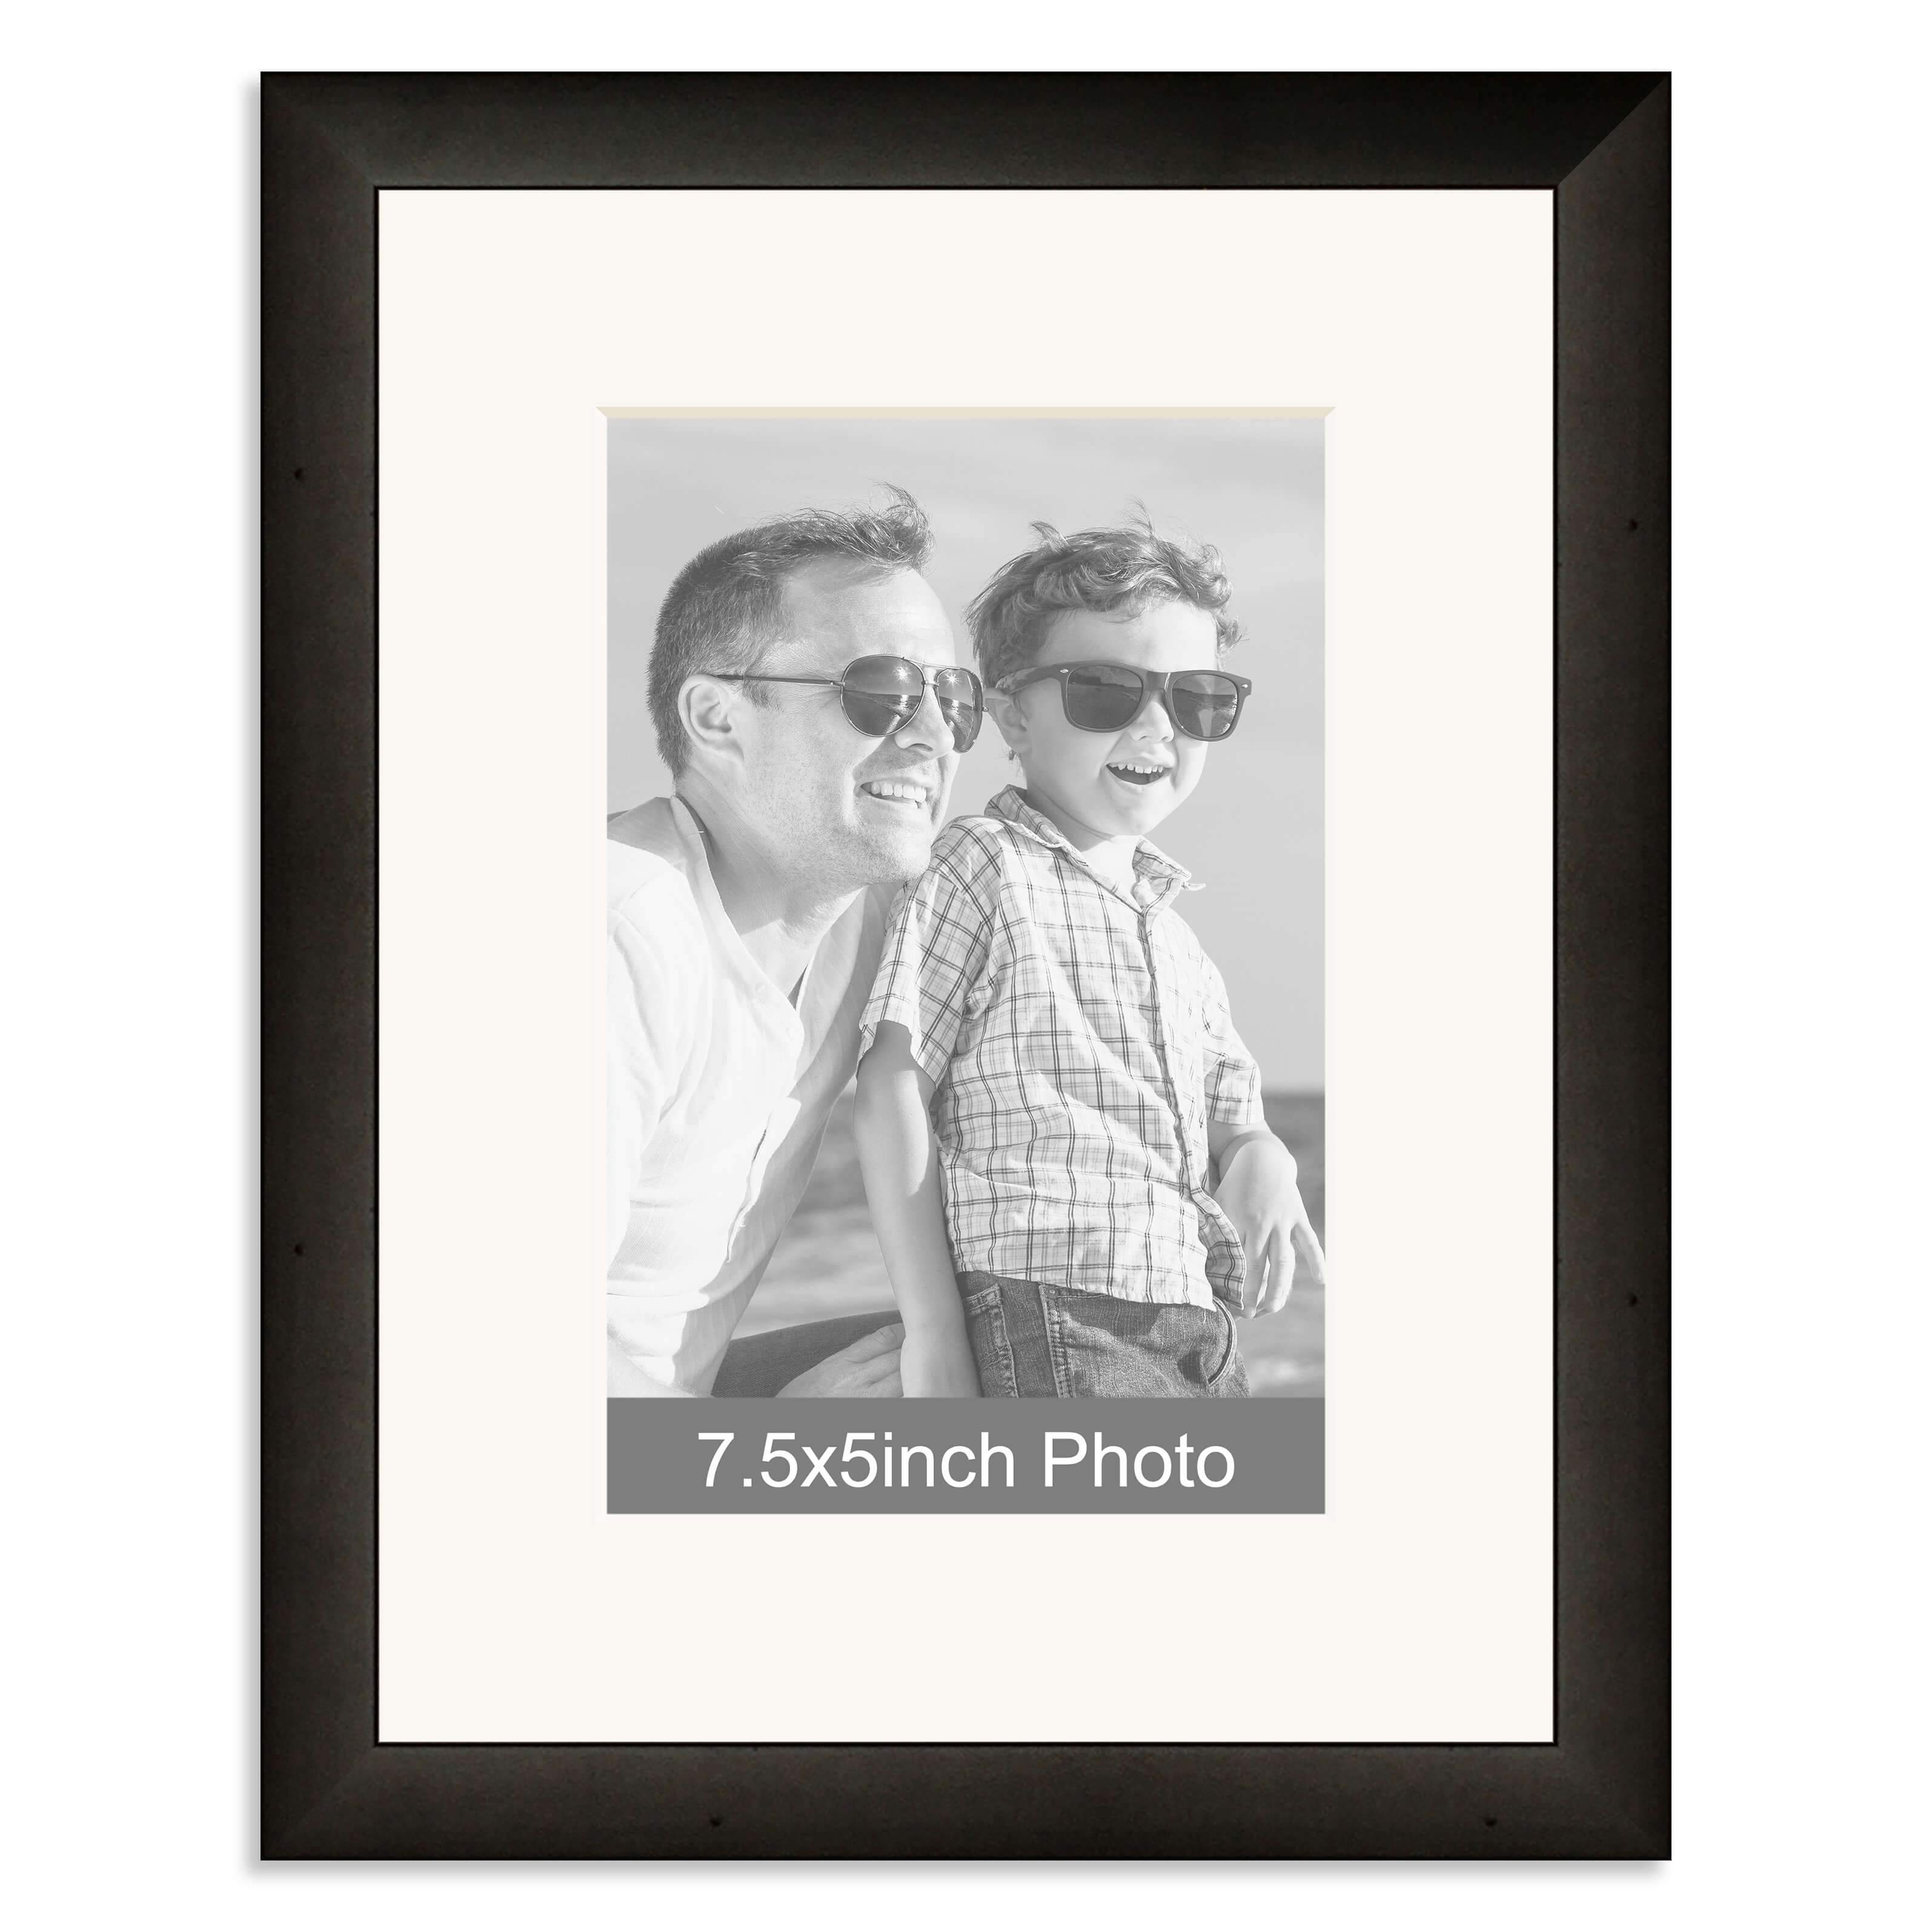 Black Wooden Photo Frame with mount for a 7.5×5/5×7.5in Photo